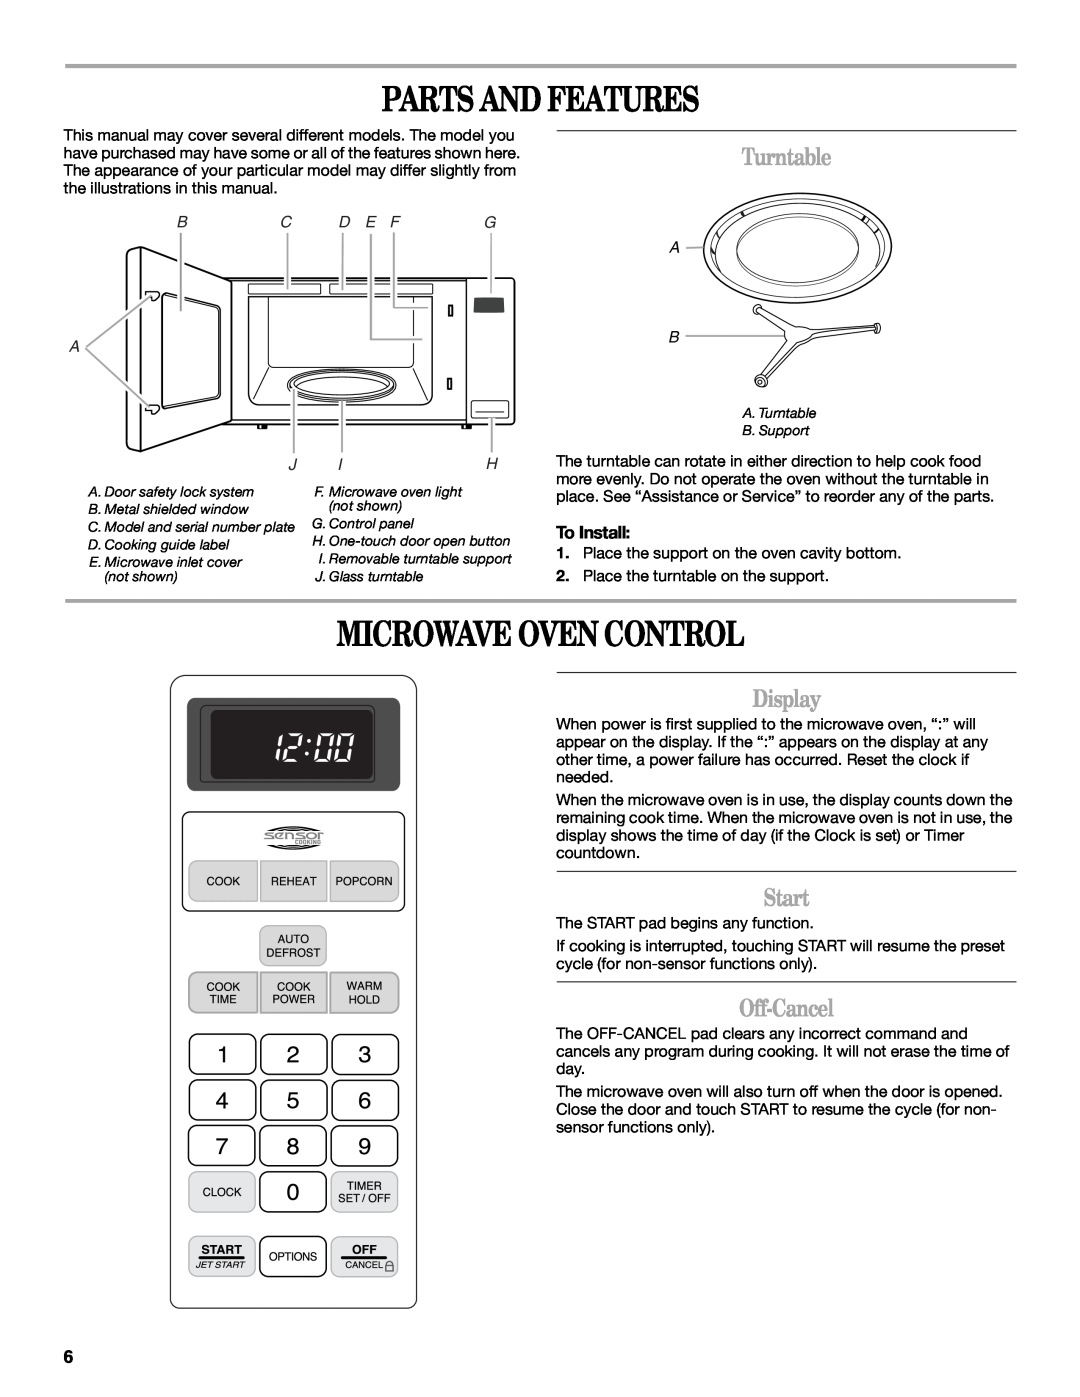 Whirlpool GT4175SP manual Parts And Features, Microwave Oven Control, Turntable, Display, Start, Off-Cancel, D E F 